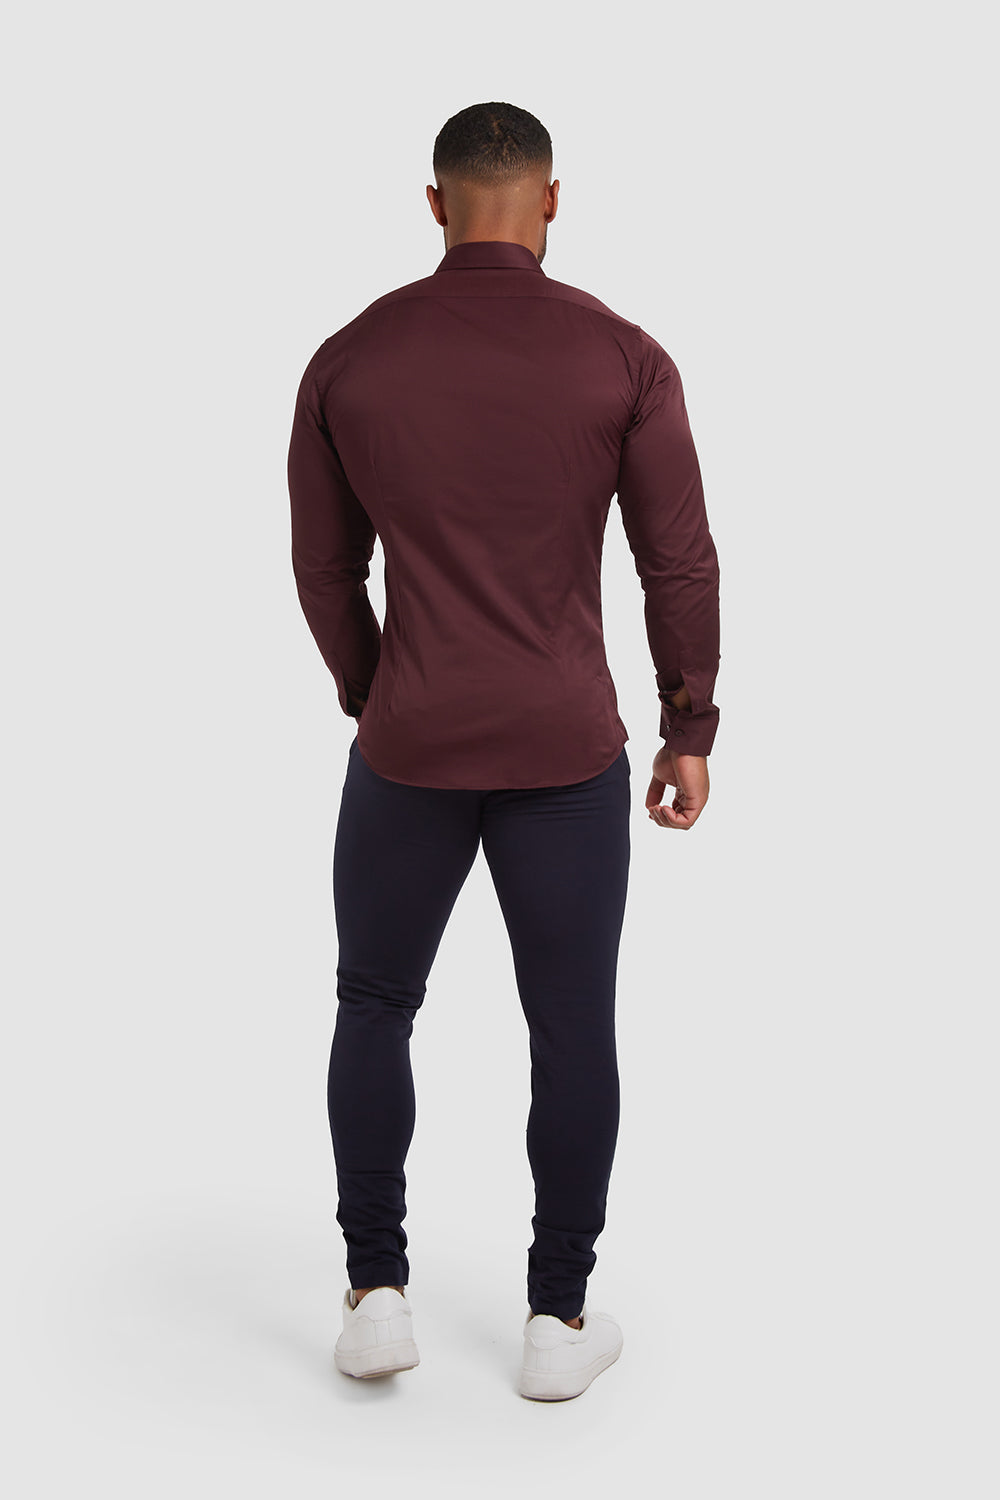 Muscle Fit Signature Shirt 2.0 TAILORED Burgundy - USA in ATHLETE 